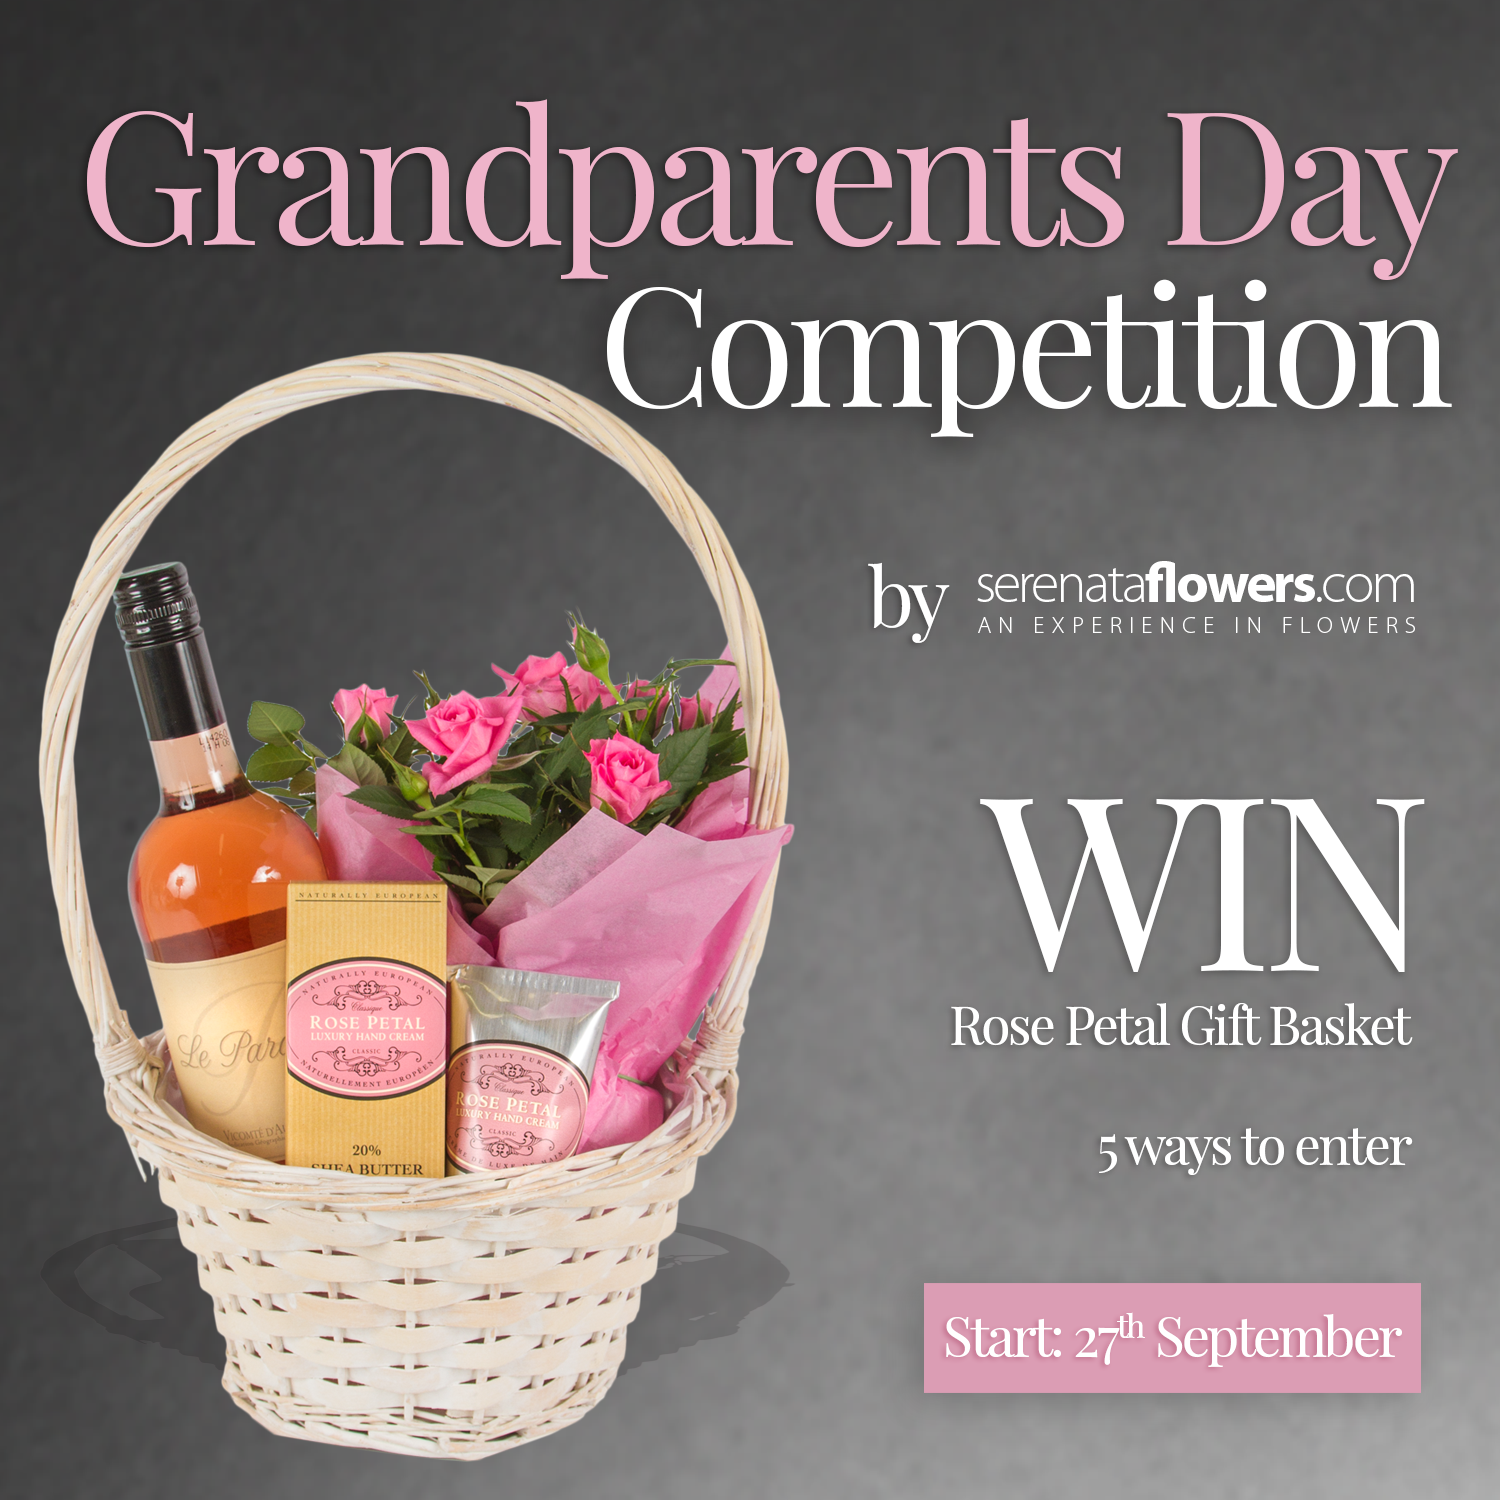 Grandparents day competition